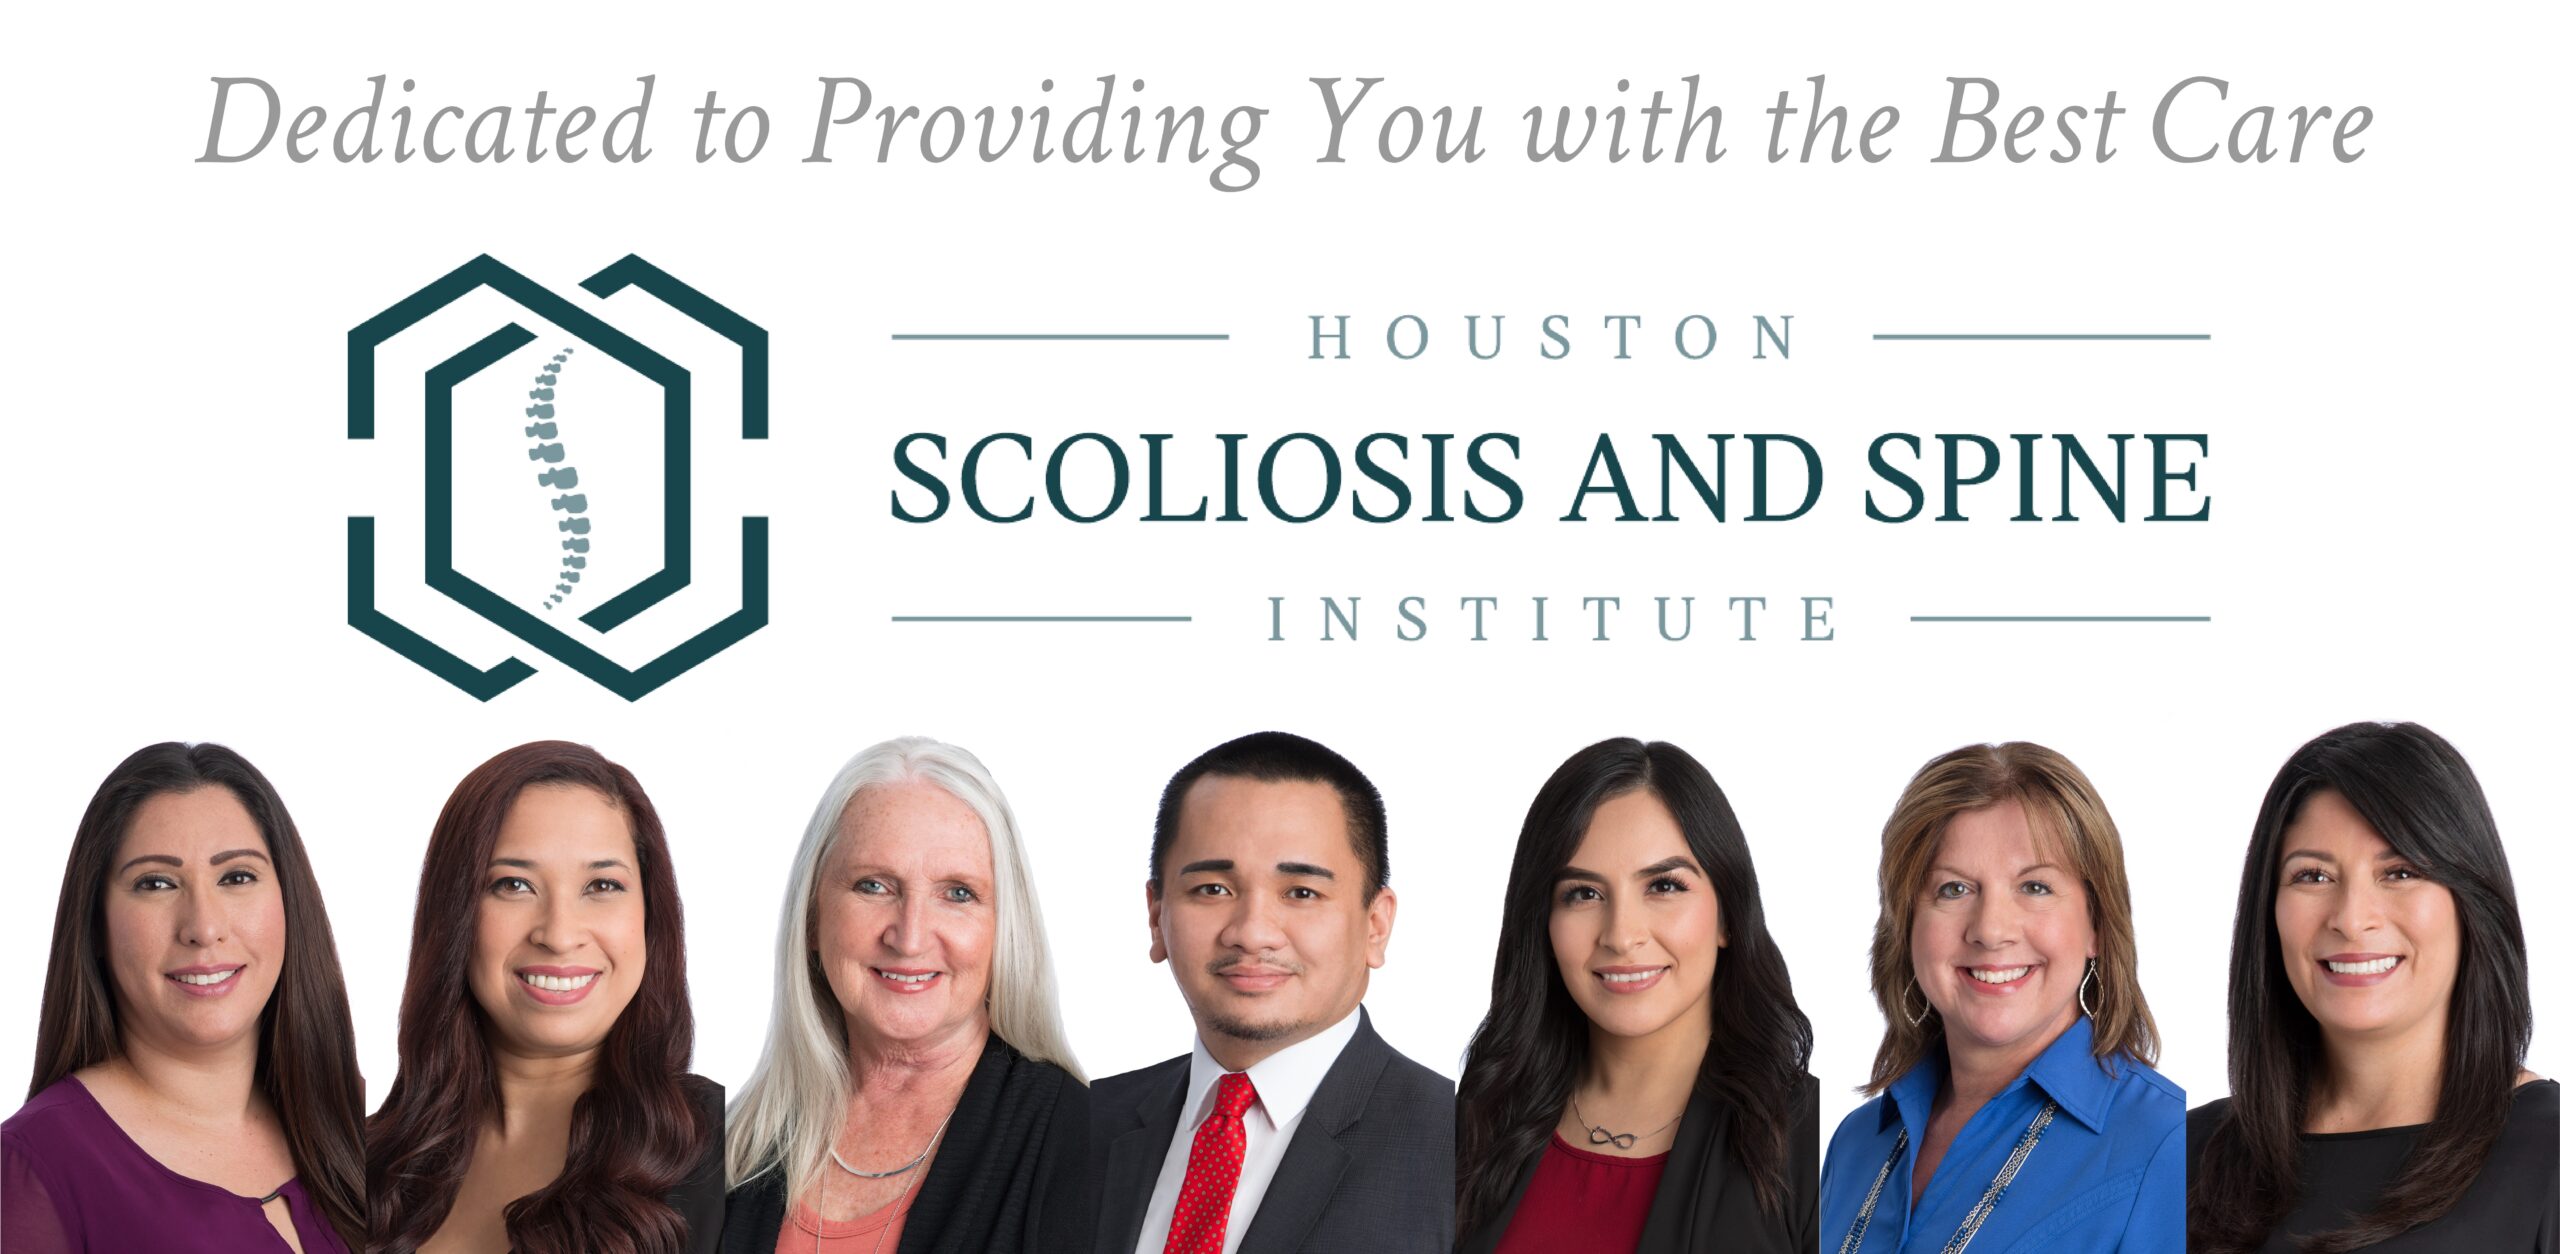 Image of the Houston Scoliosis and Spine Institute